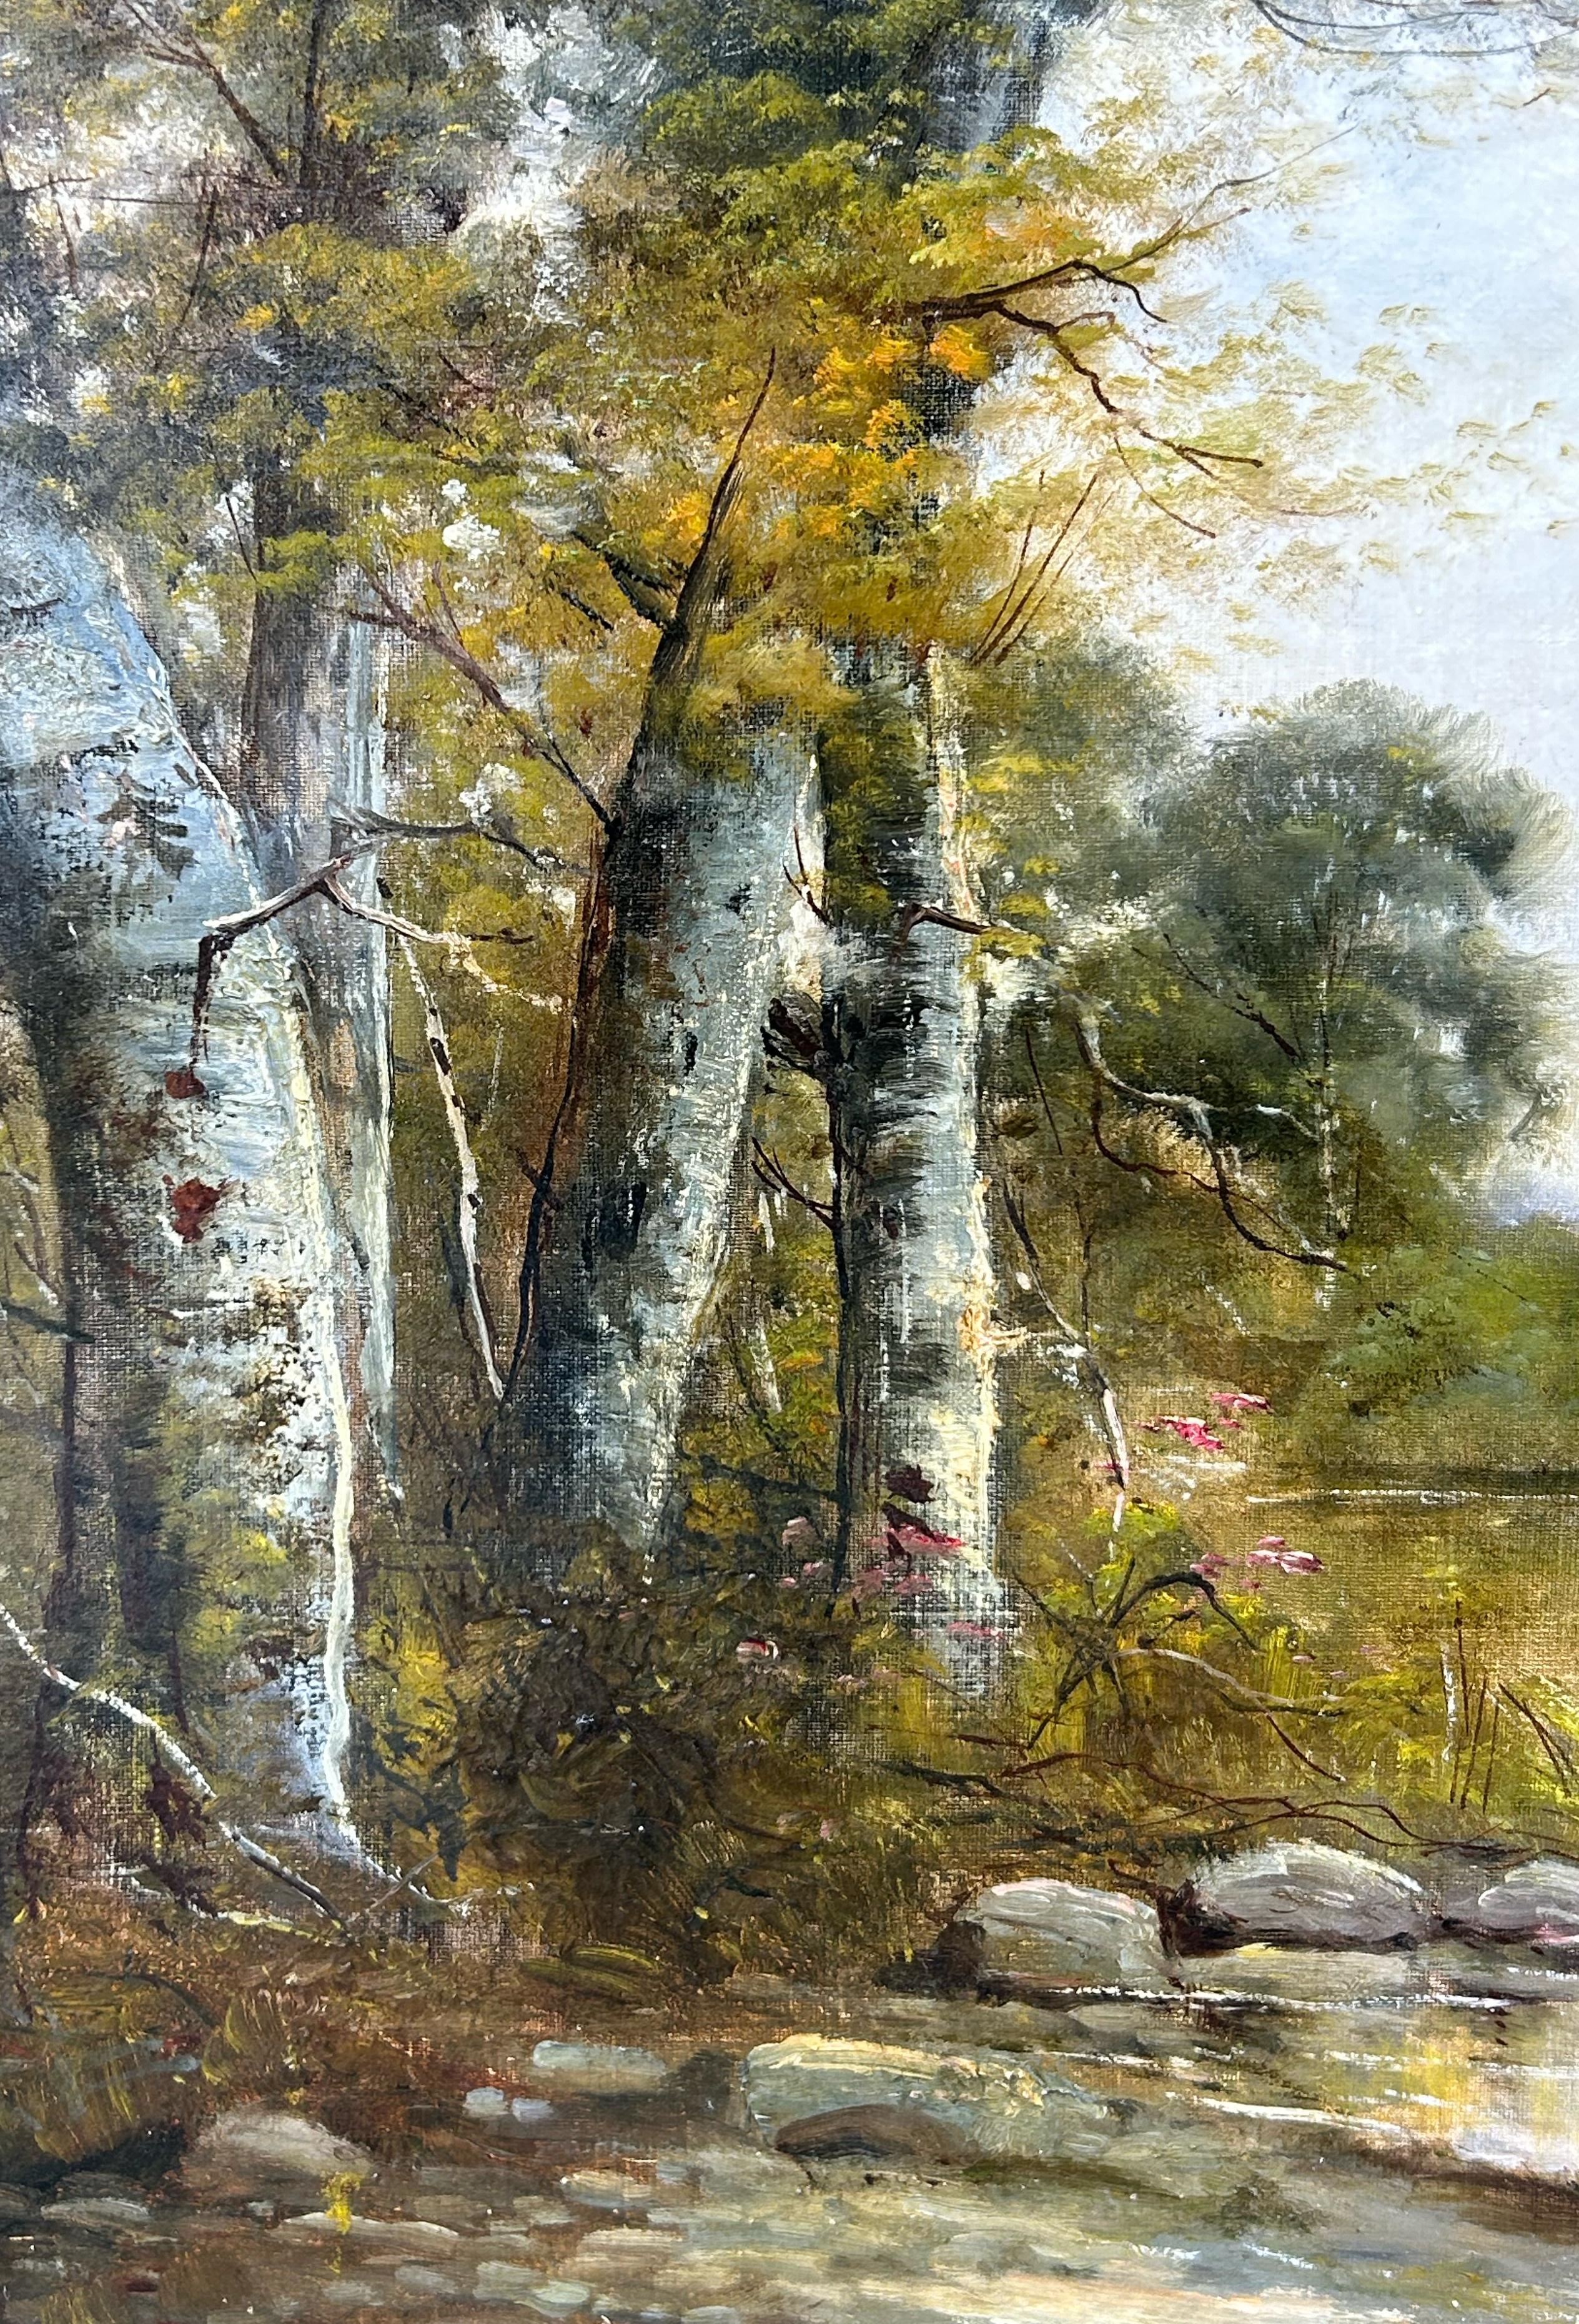 Paul ARMANDI (19th Century)
Wood Landscapes by the river  
Oils on canvas in pair signed low right
New golden frames  
Chassis Dim: 40 X 65 cm
Frame Dim: 50 X 75 cm
Paul ARMANDI is one of the painters from the Barbizon School.
Museum : Beaux-Arts de